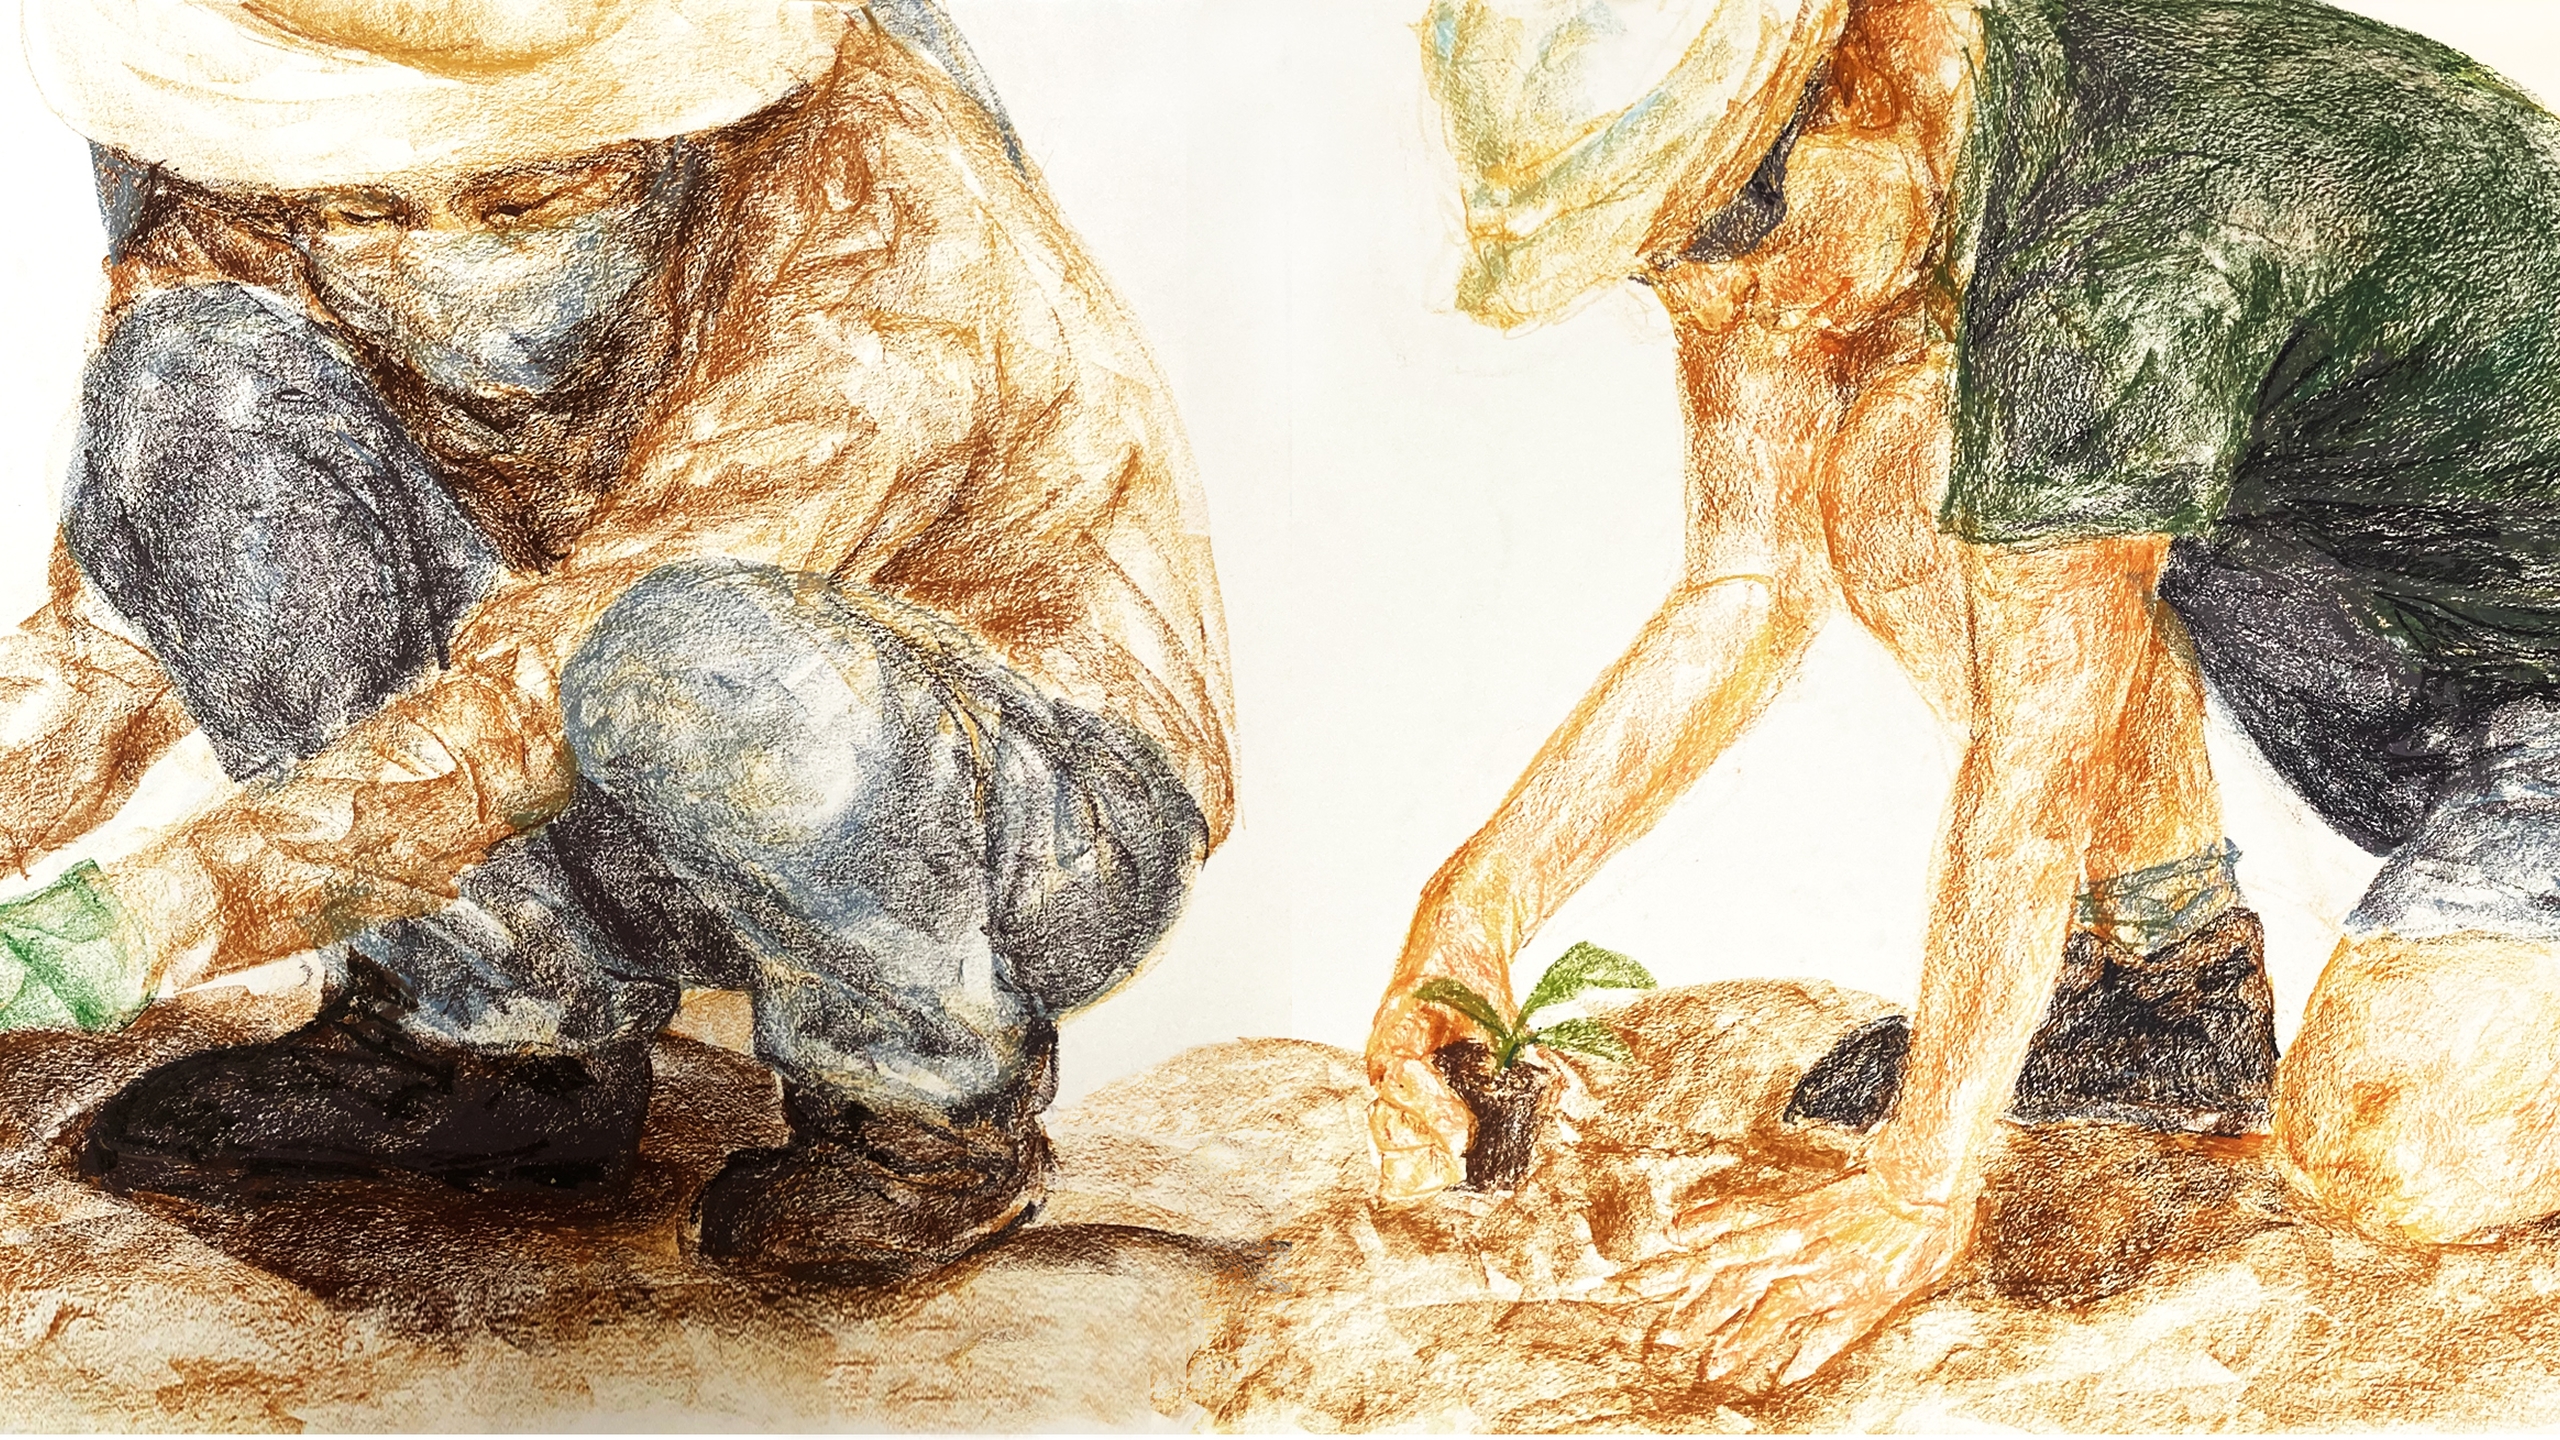 A coloured pencil illustration of two agricultural workers: one Thai and one Israeli. They are crouching down and tending to the soil.